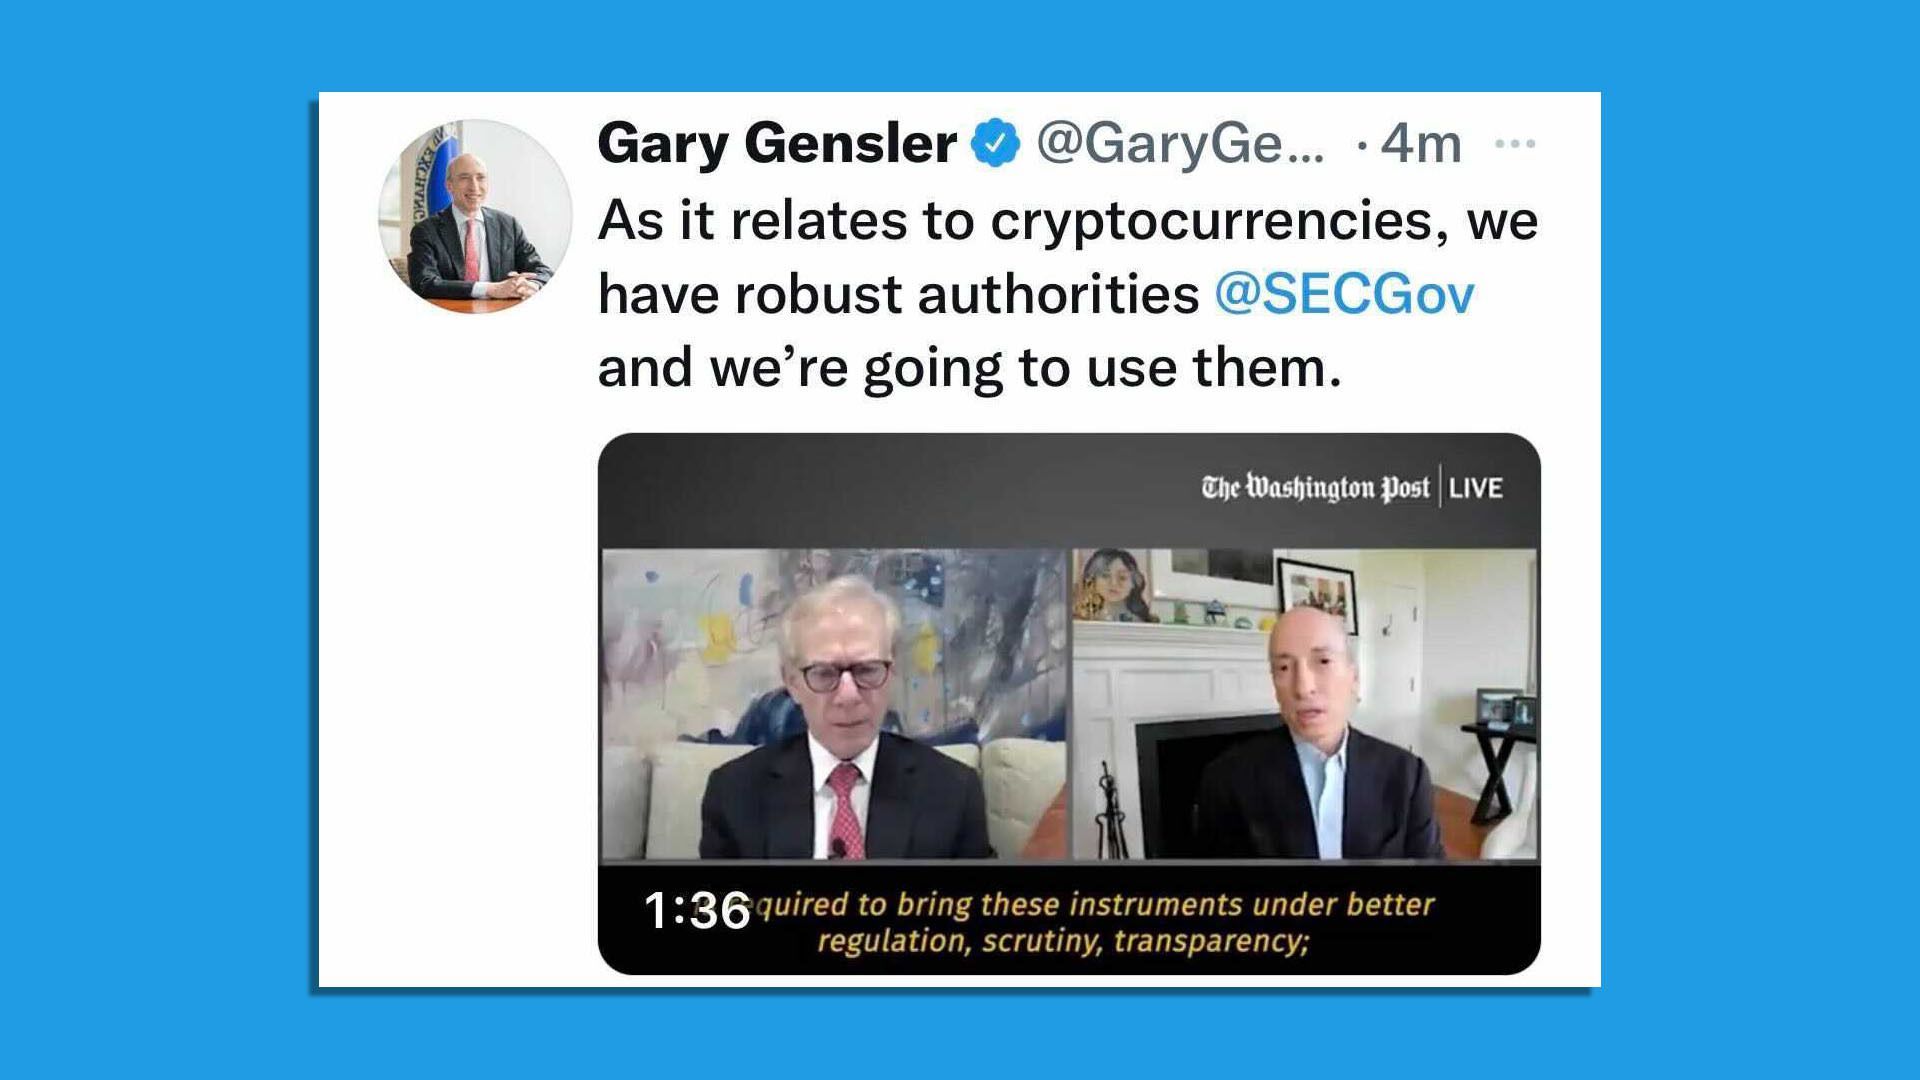 A tweet from Gary Gensler that says: As it relates to cryptocurrencies, we have robust authorities @SECGov and we’re going to use them.